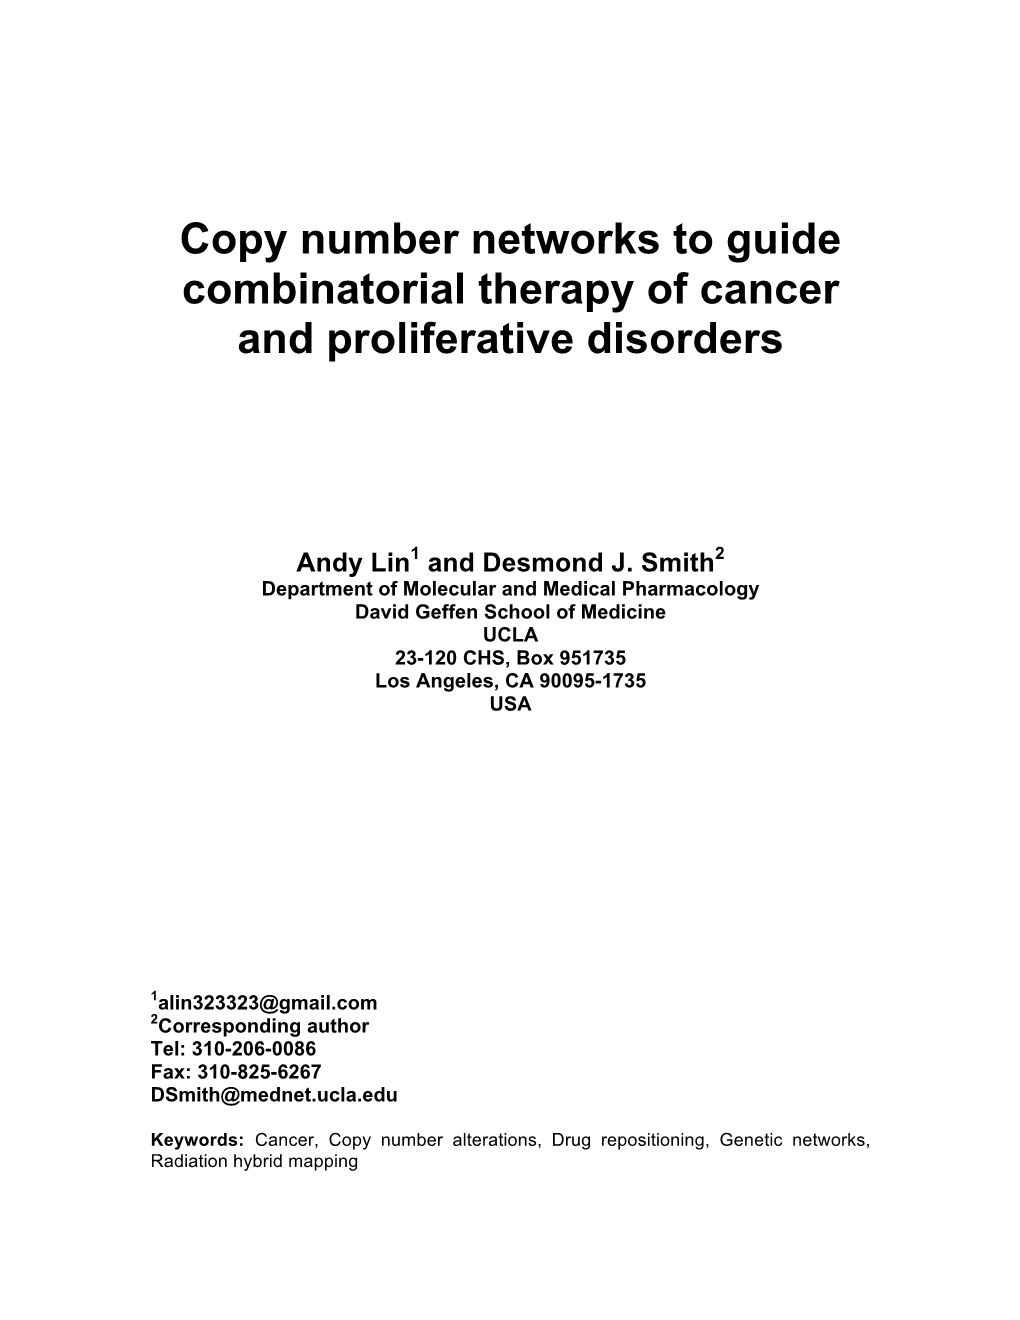 Copy Number Networks to Guide Combinatorial Therapy of Cancer and Proliferative Disorders